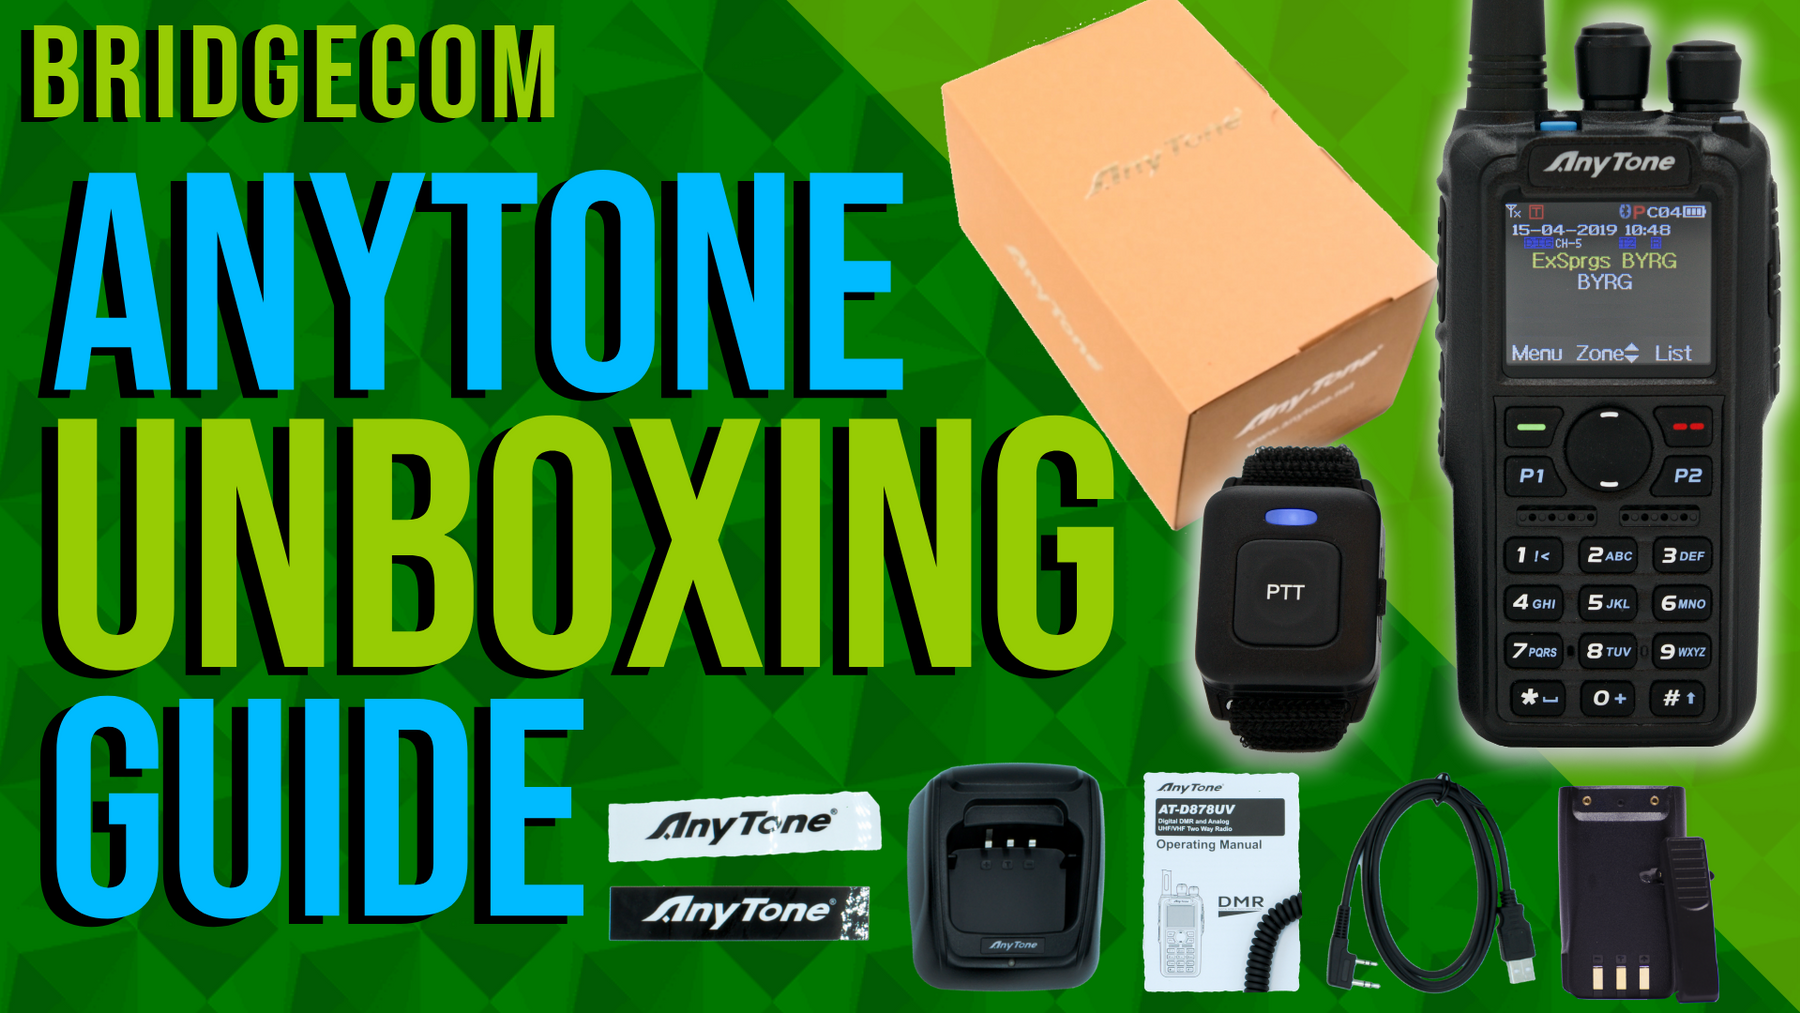 AnyTone Unboxing Guide